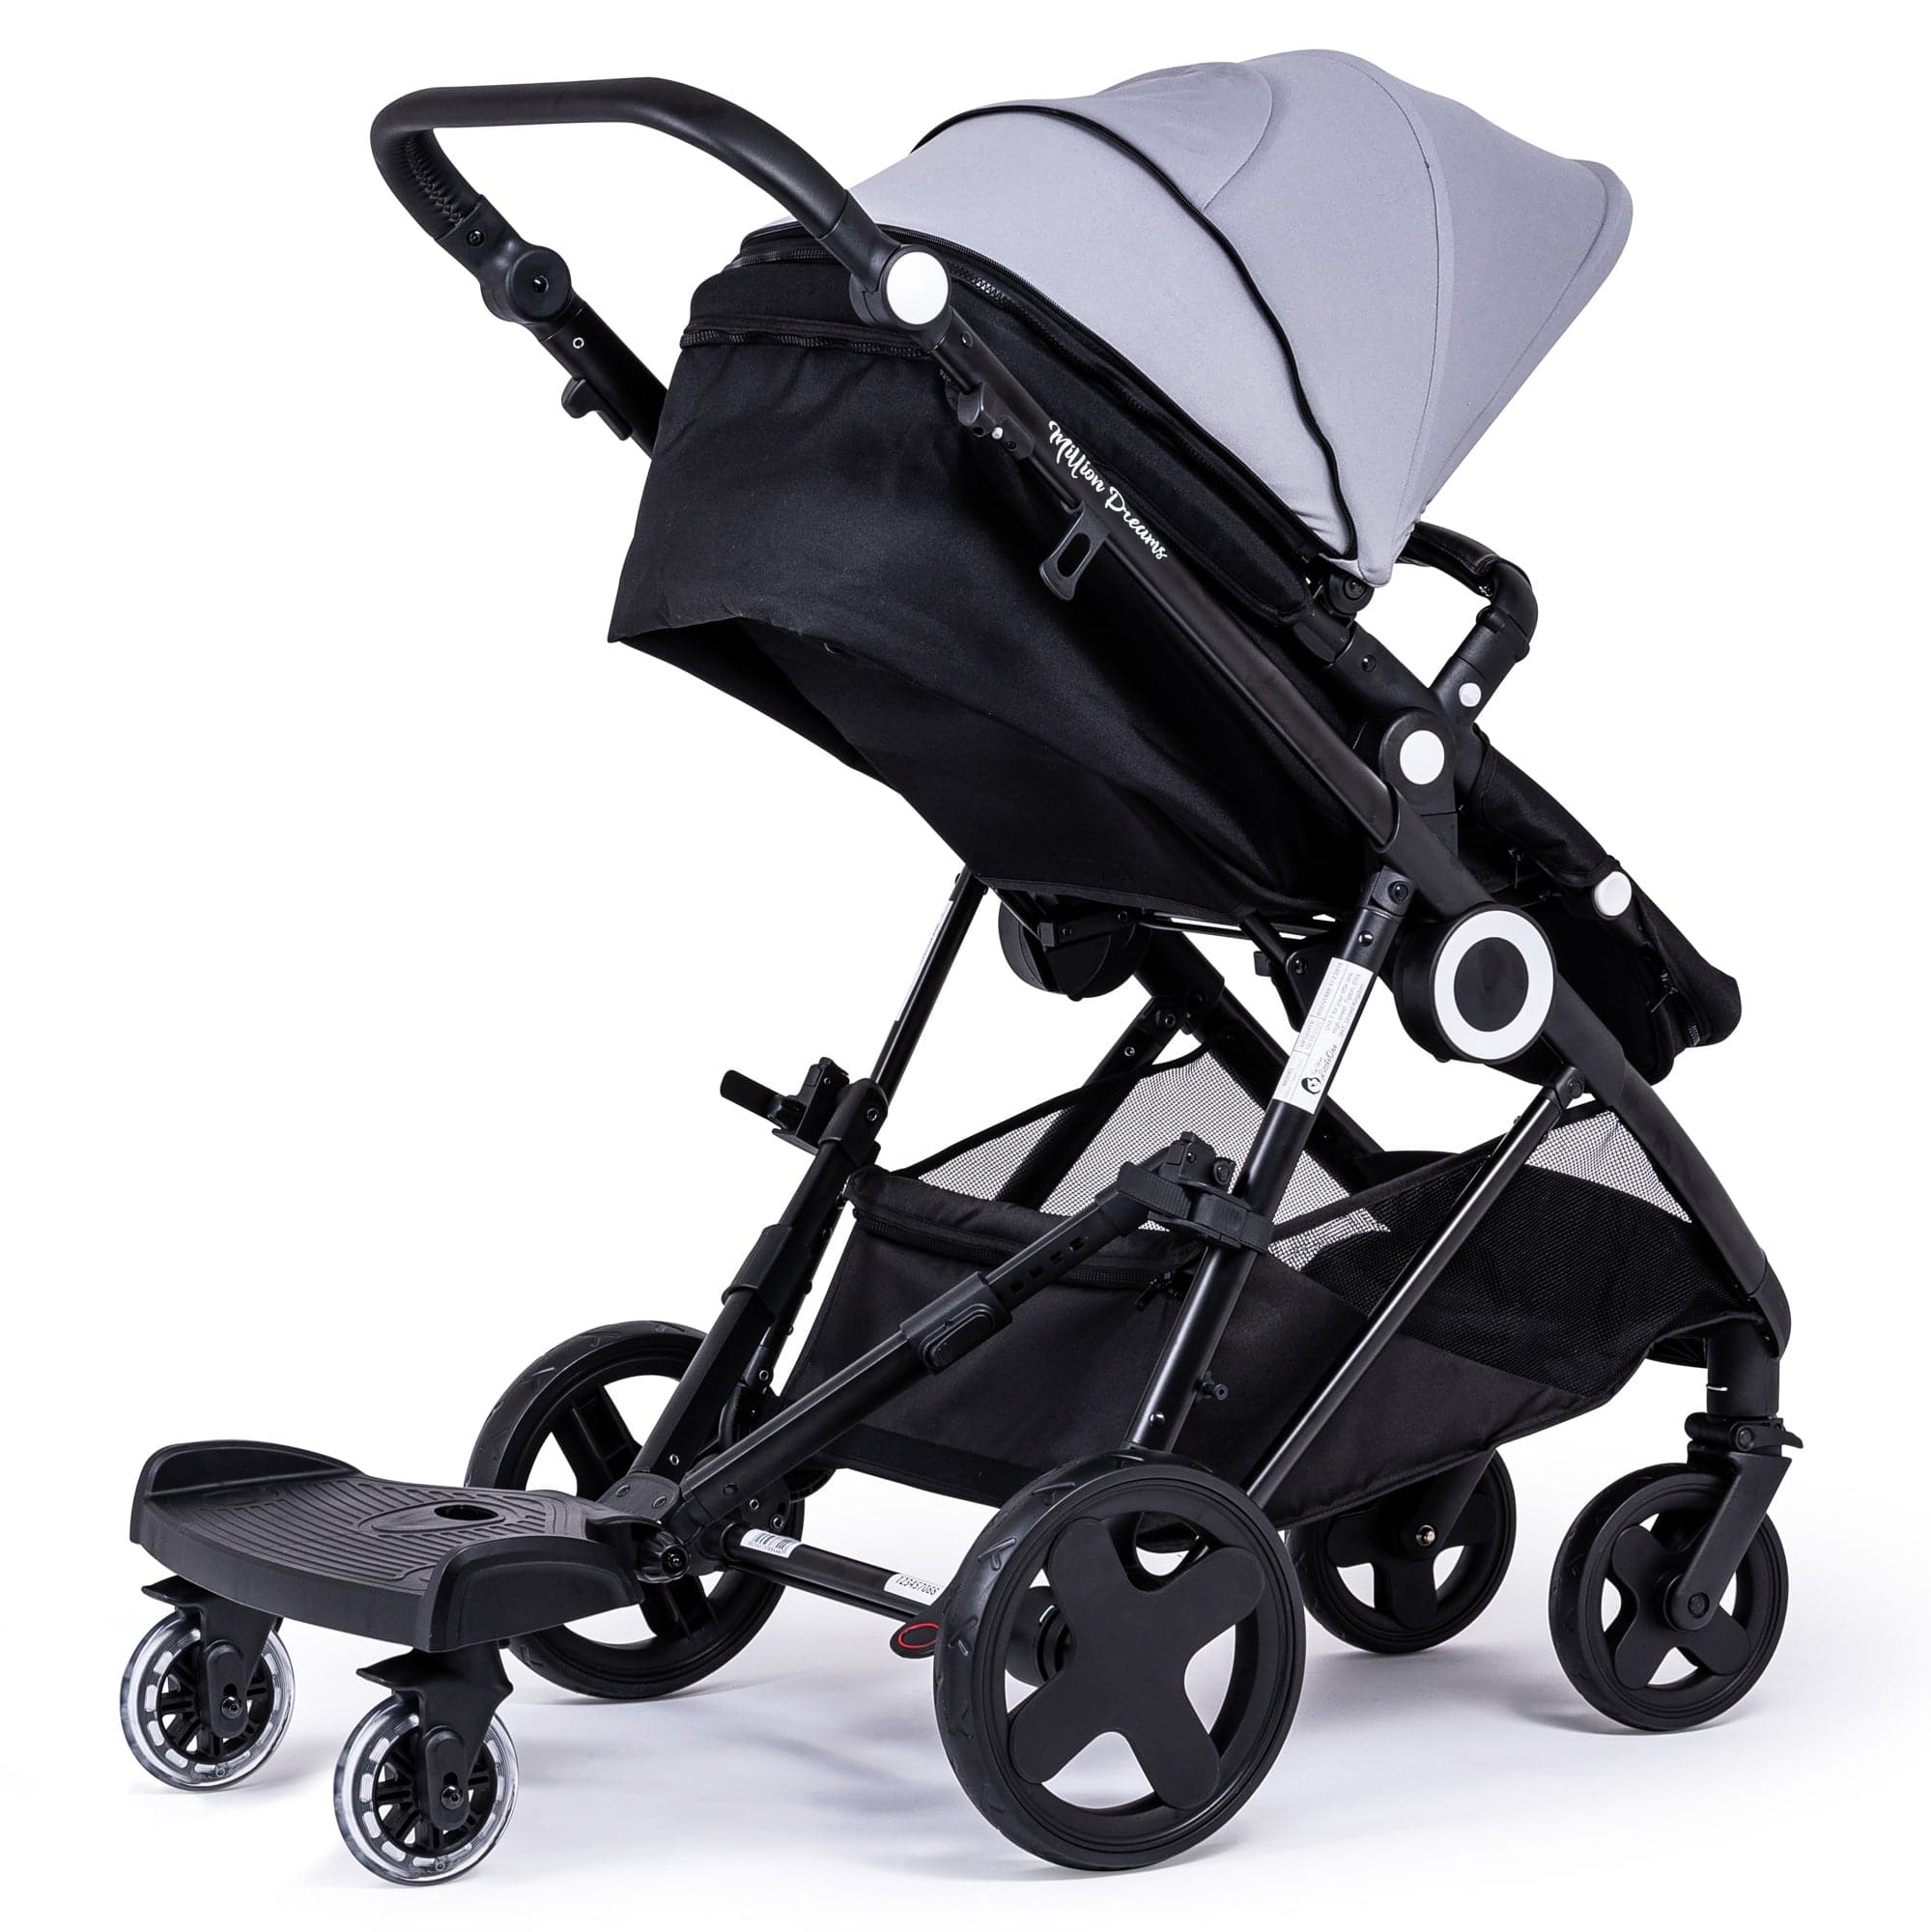 Ride On Board with Seat Compatible with BabiesRus - For Your Little One